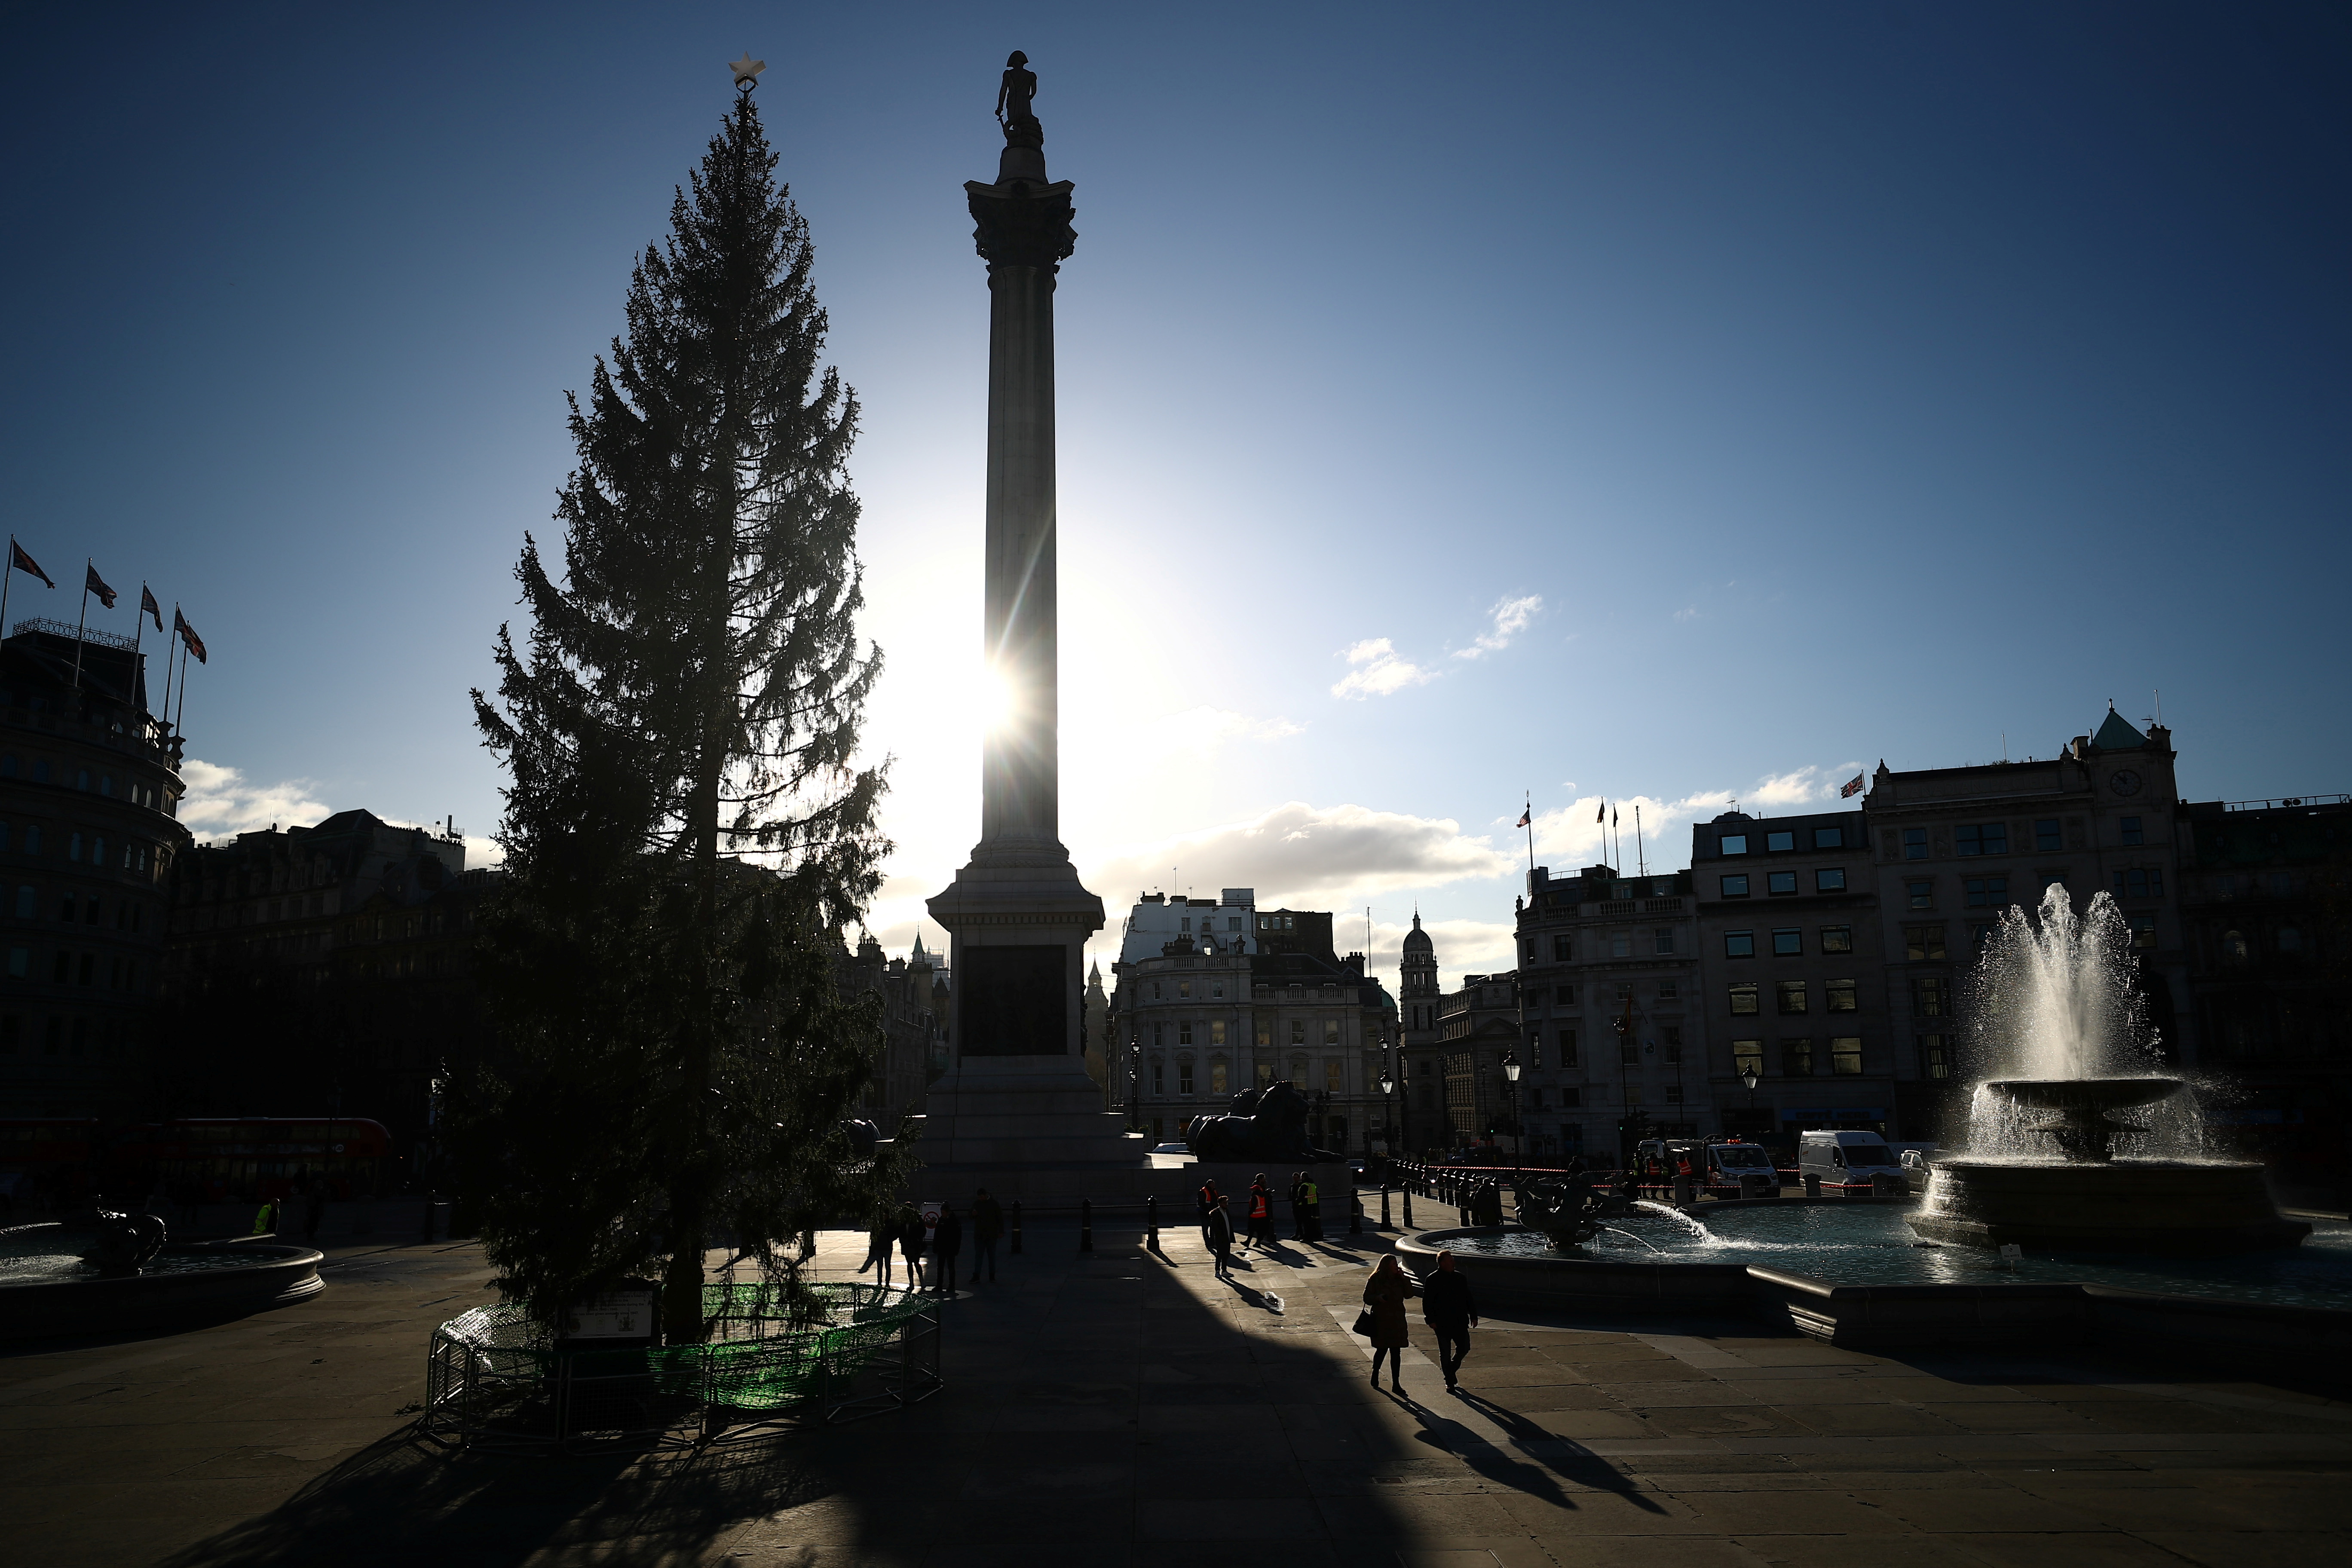 A view of the Trafalgar Square Christmas tree in London